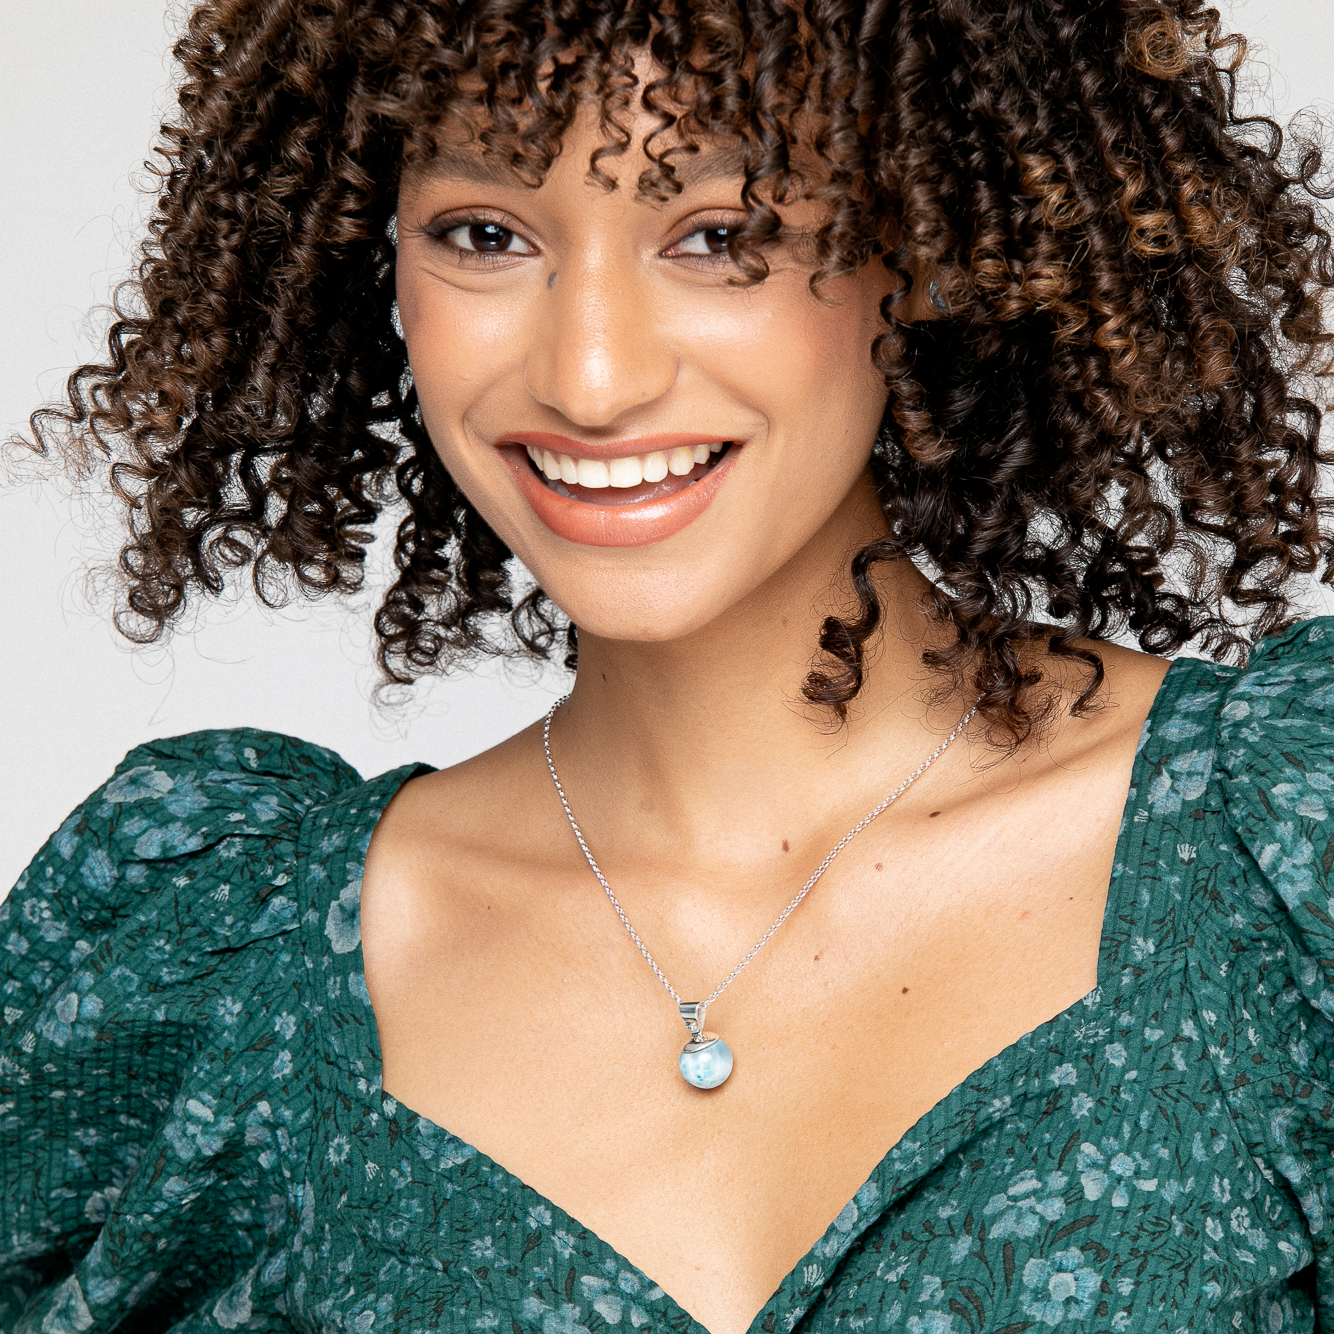 Refined taste deserves a match - Giulia Larimar bead pendant. Handcrafted in sterling silver, showcasing the natural beauty of the round Larimar stone. Perfect for any occasion, solo or layered. Elevate your style with the sophistication of Giulia pendant.